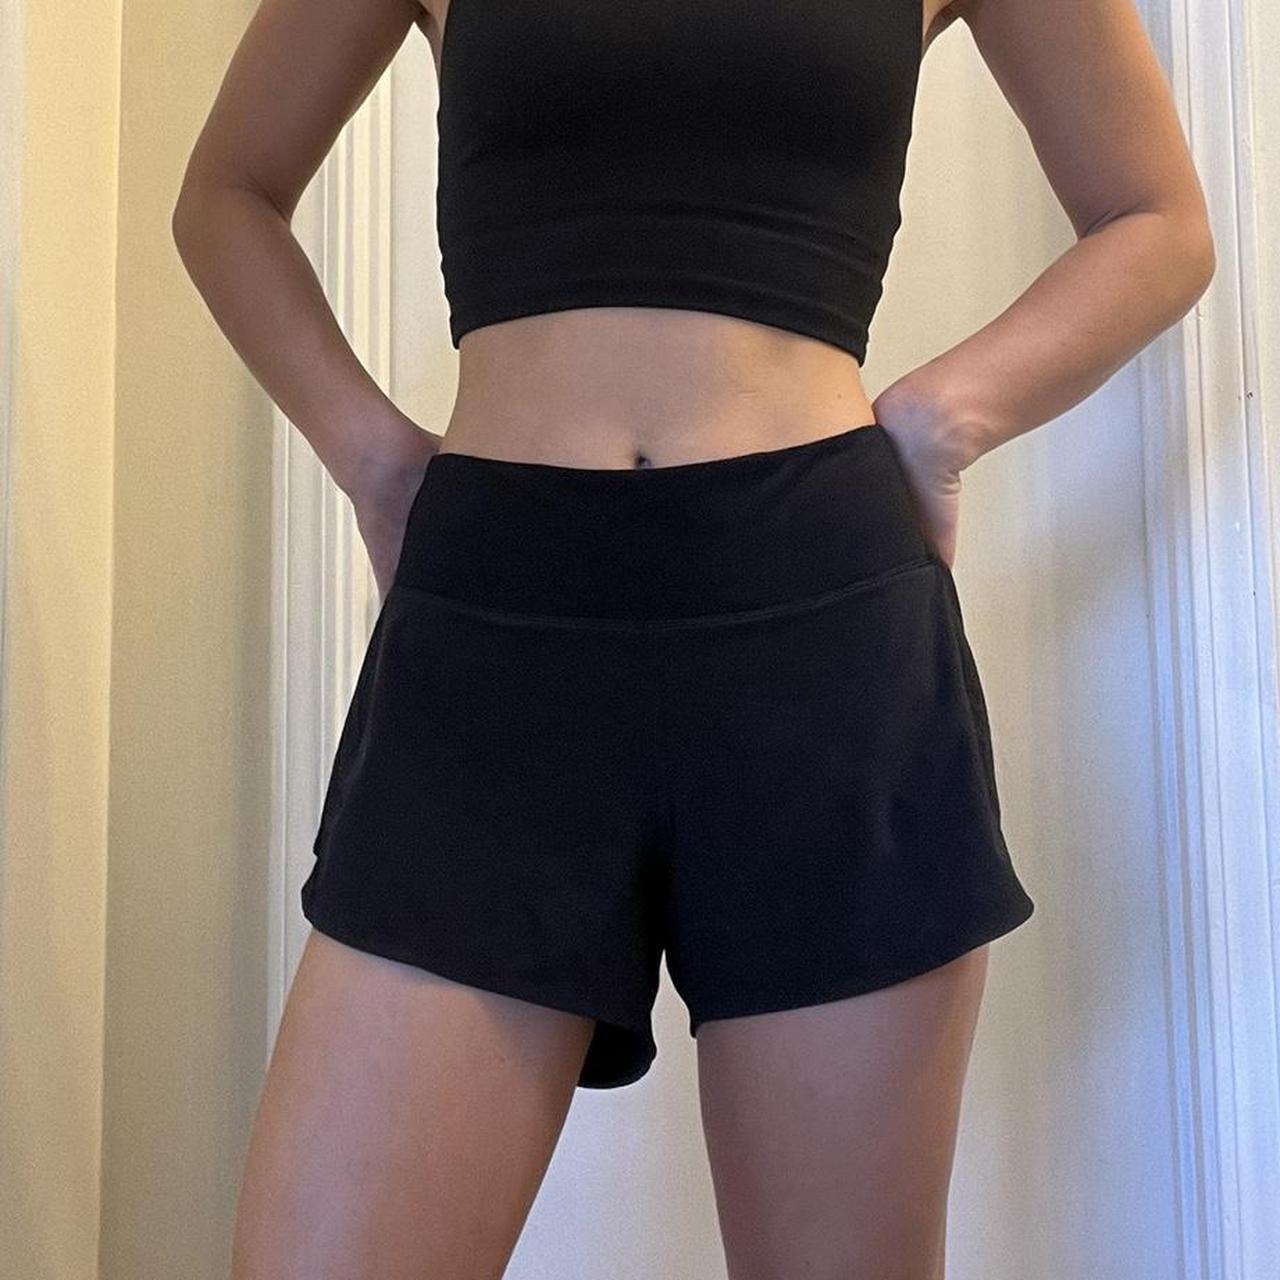 Lululemon Speed Up Low-Rise Lined Short 4. Love